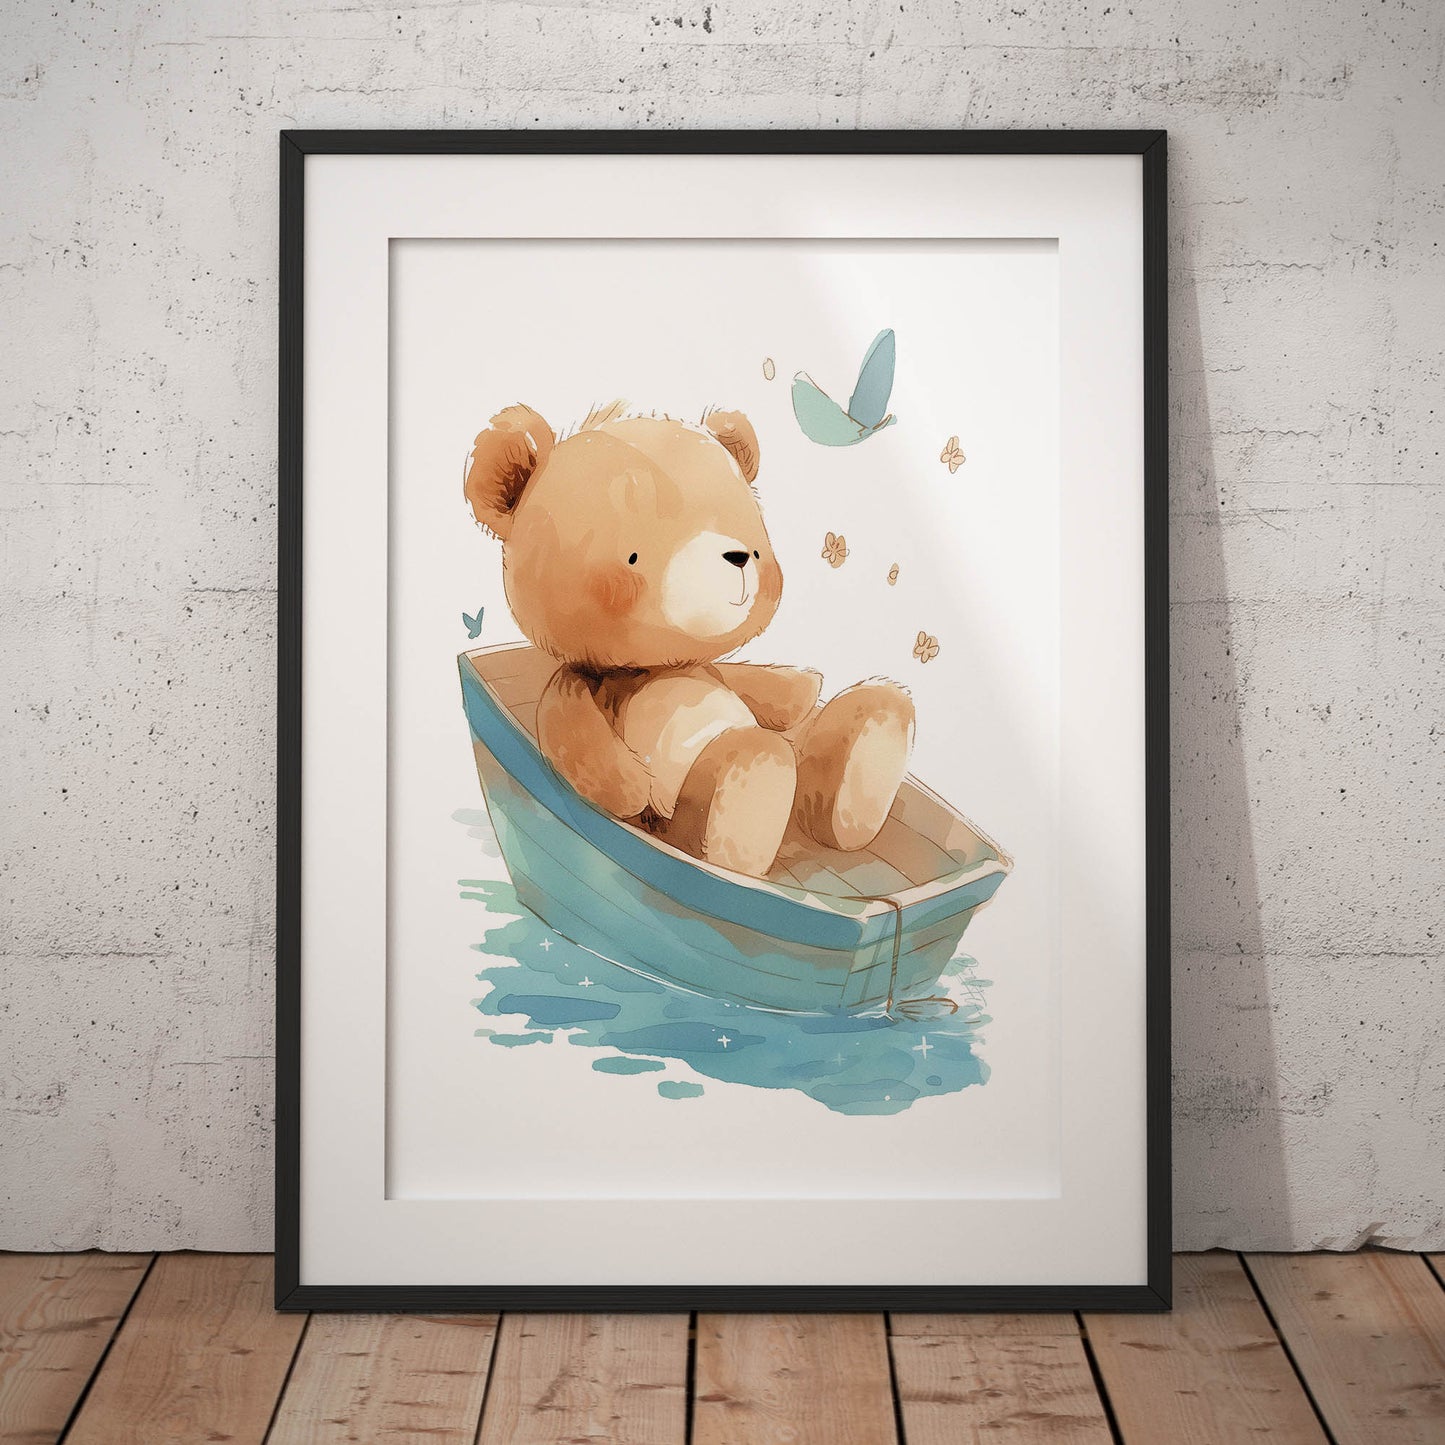 »Teddy On a Boat« barnposter